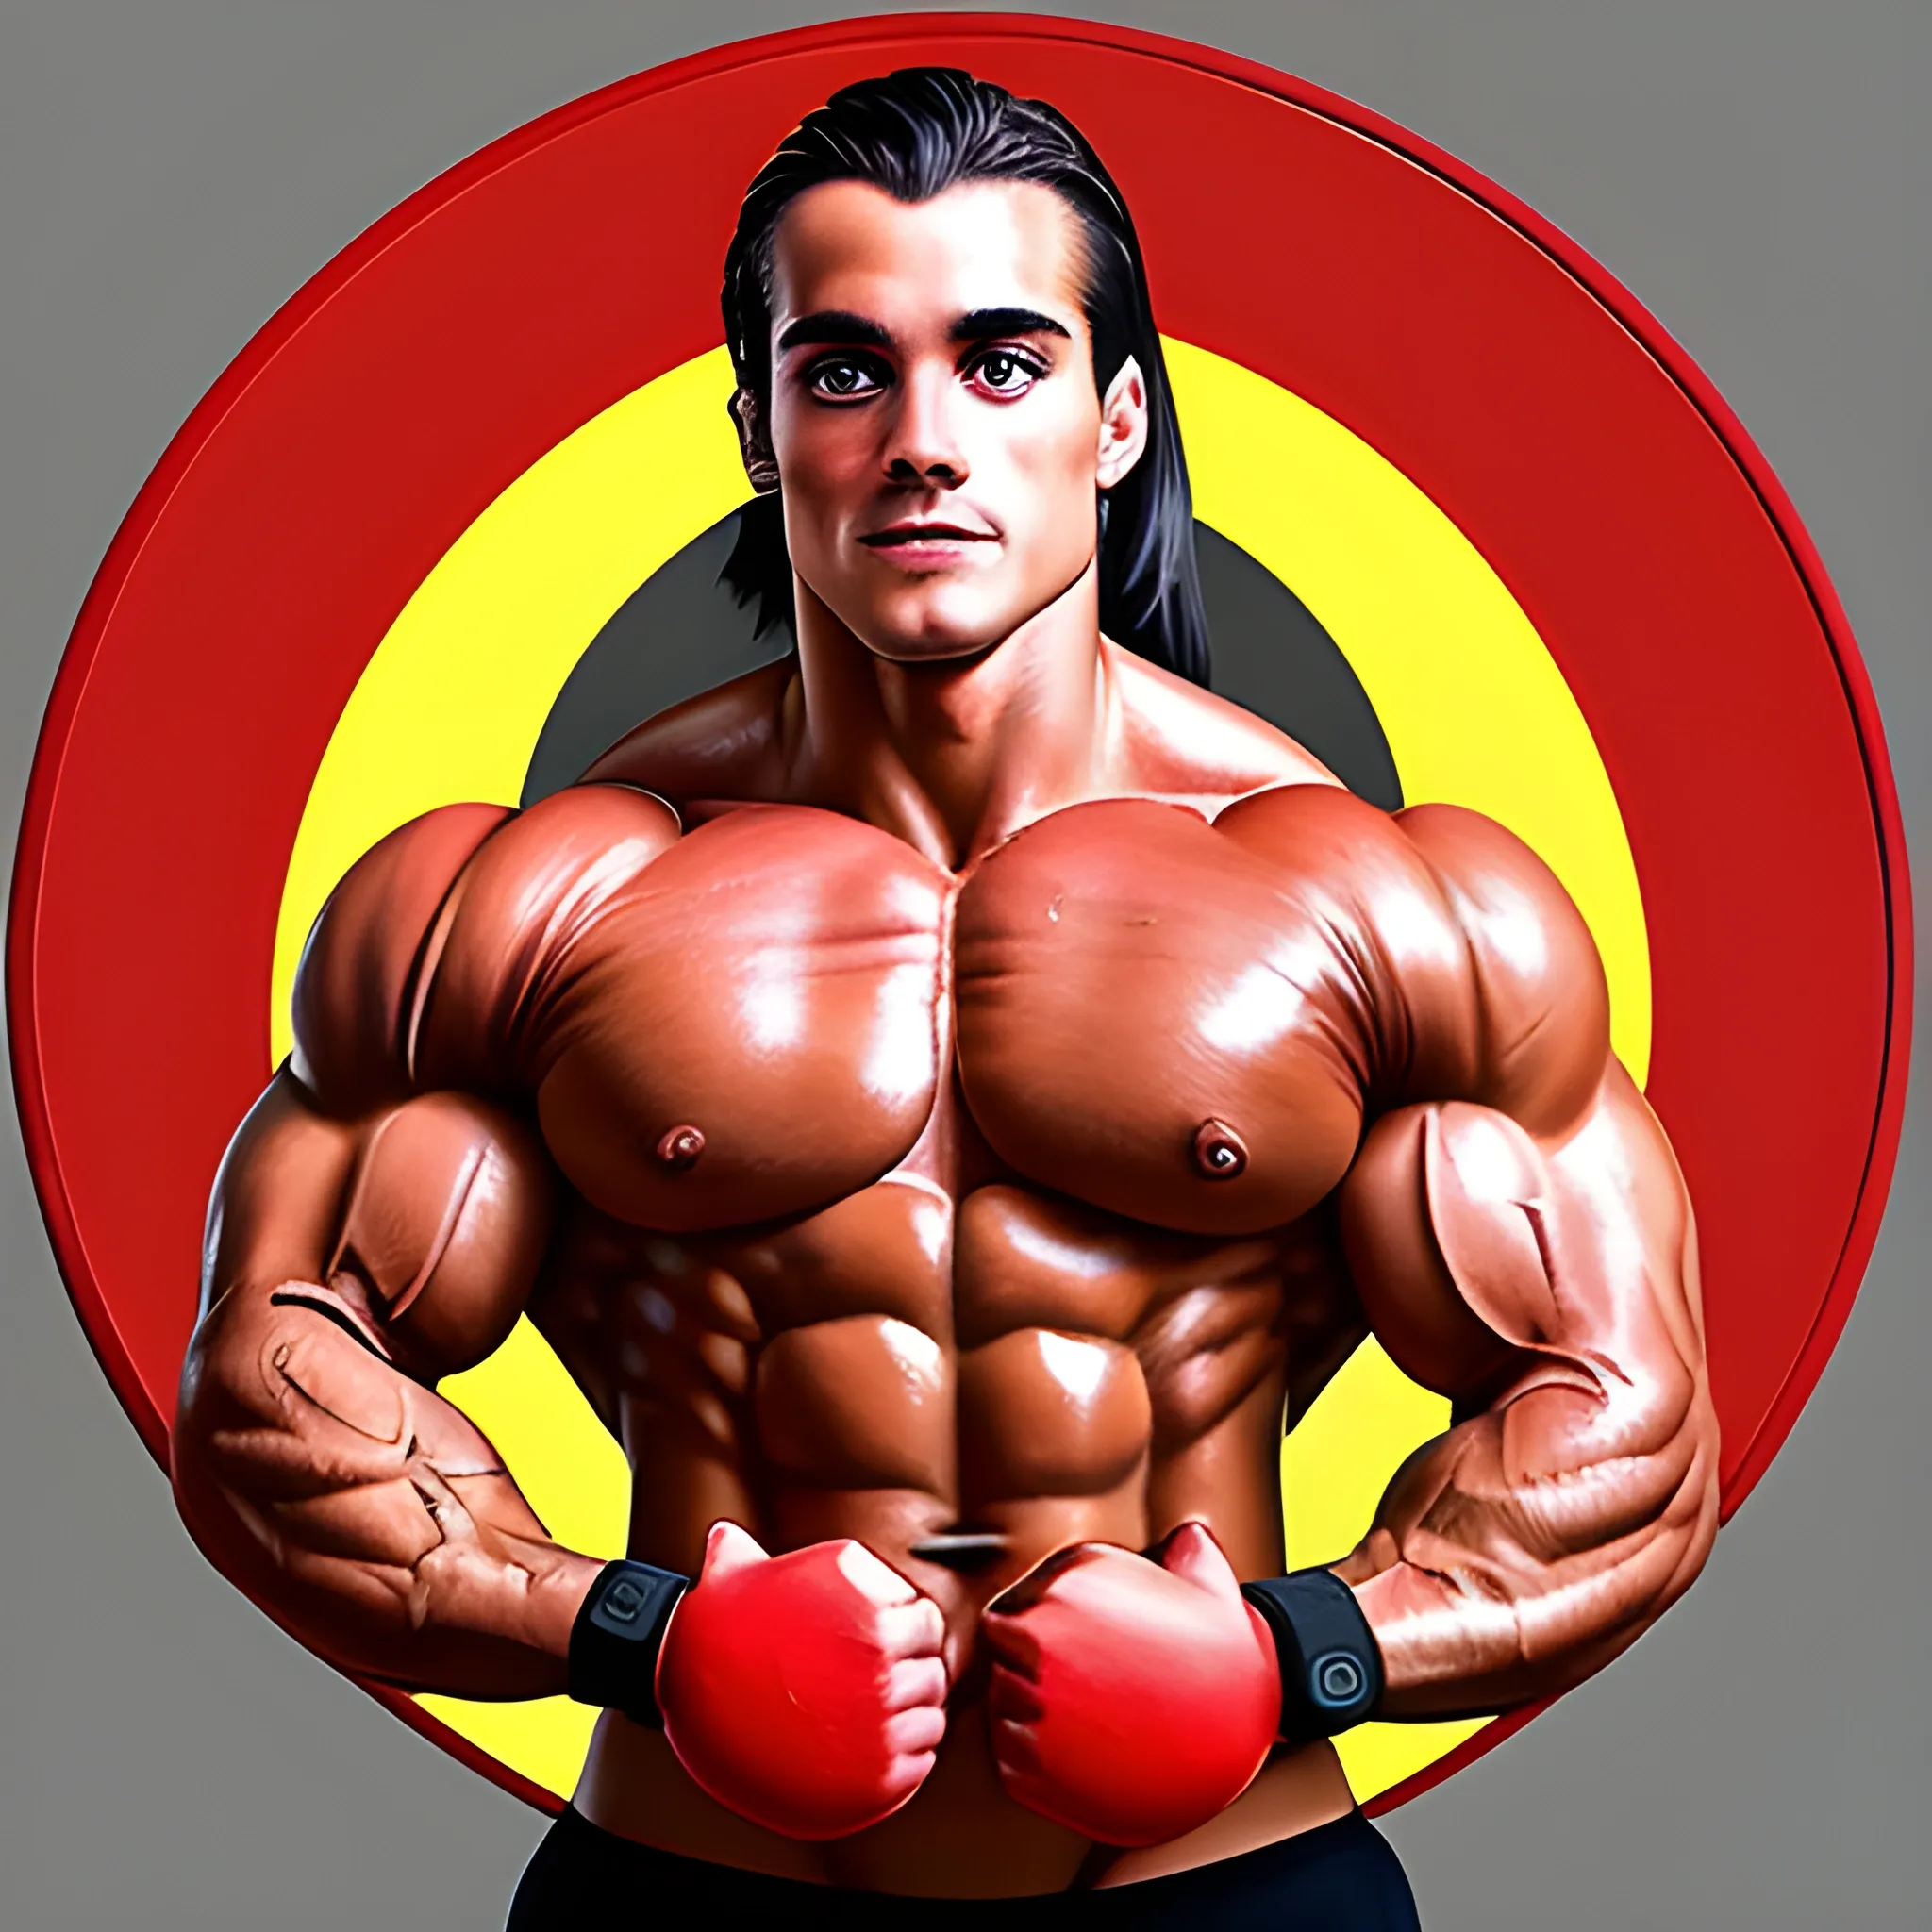 Circle Logo for a Sportbrand
Bodybuilding Pose
Name is BodyBuddy
Zyzz motivation
Colours: red, Oil Painting